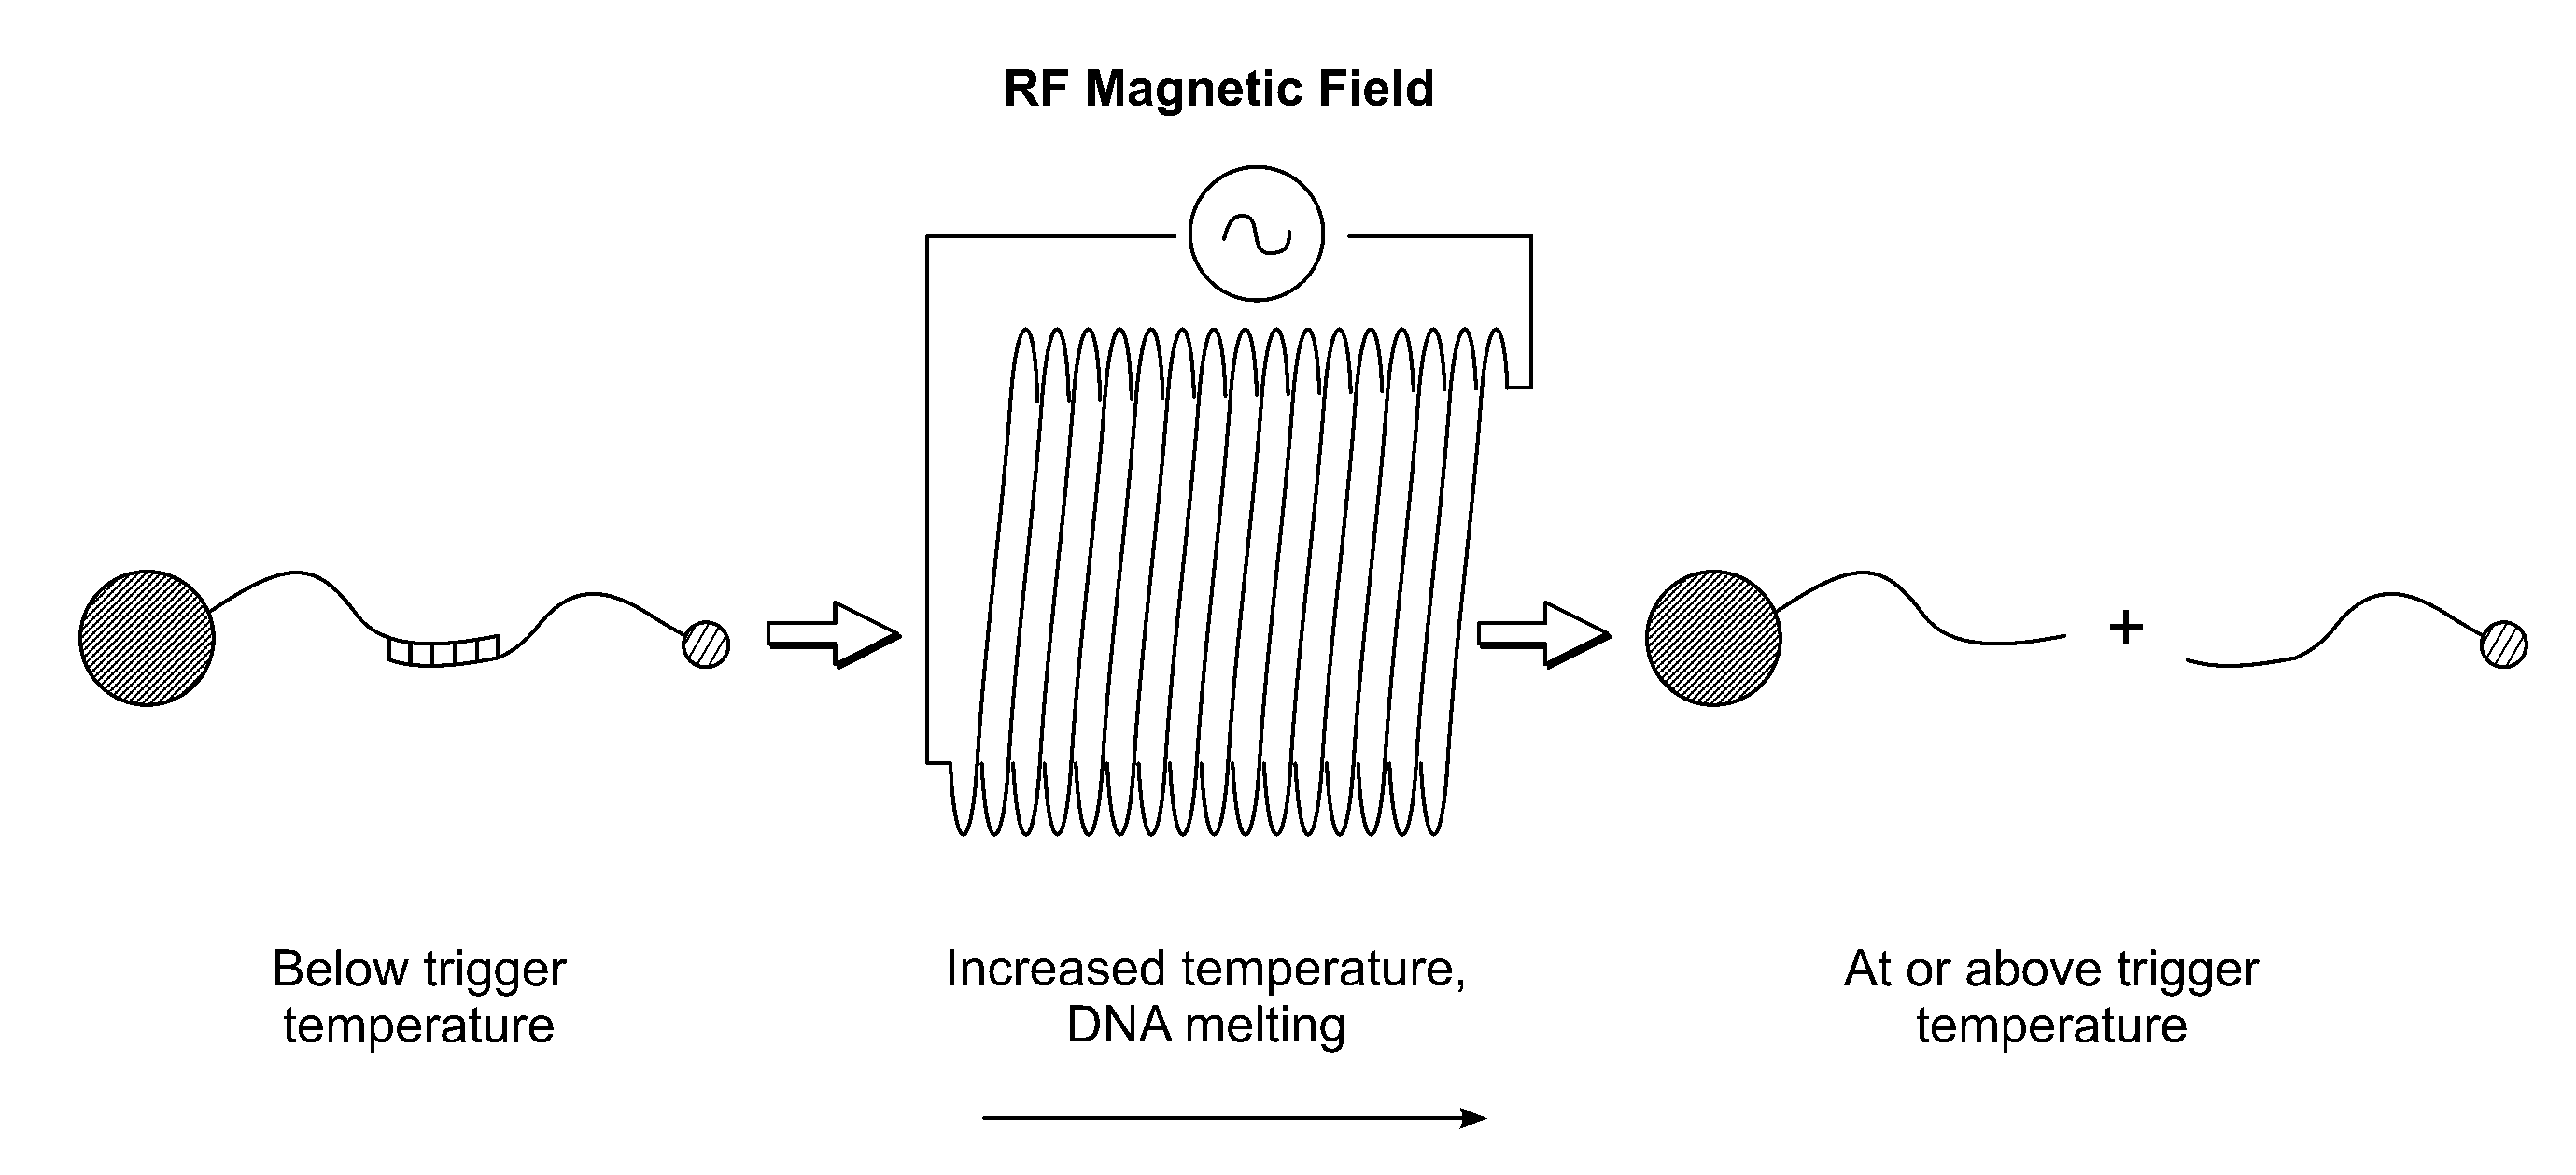 Remotely triggered release from heatable surfaces